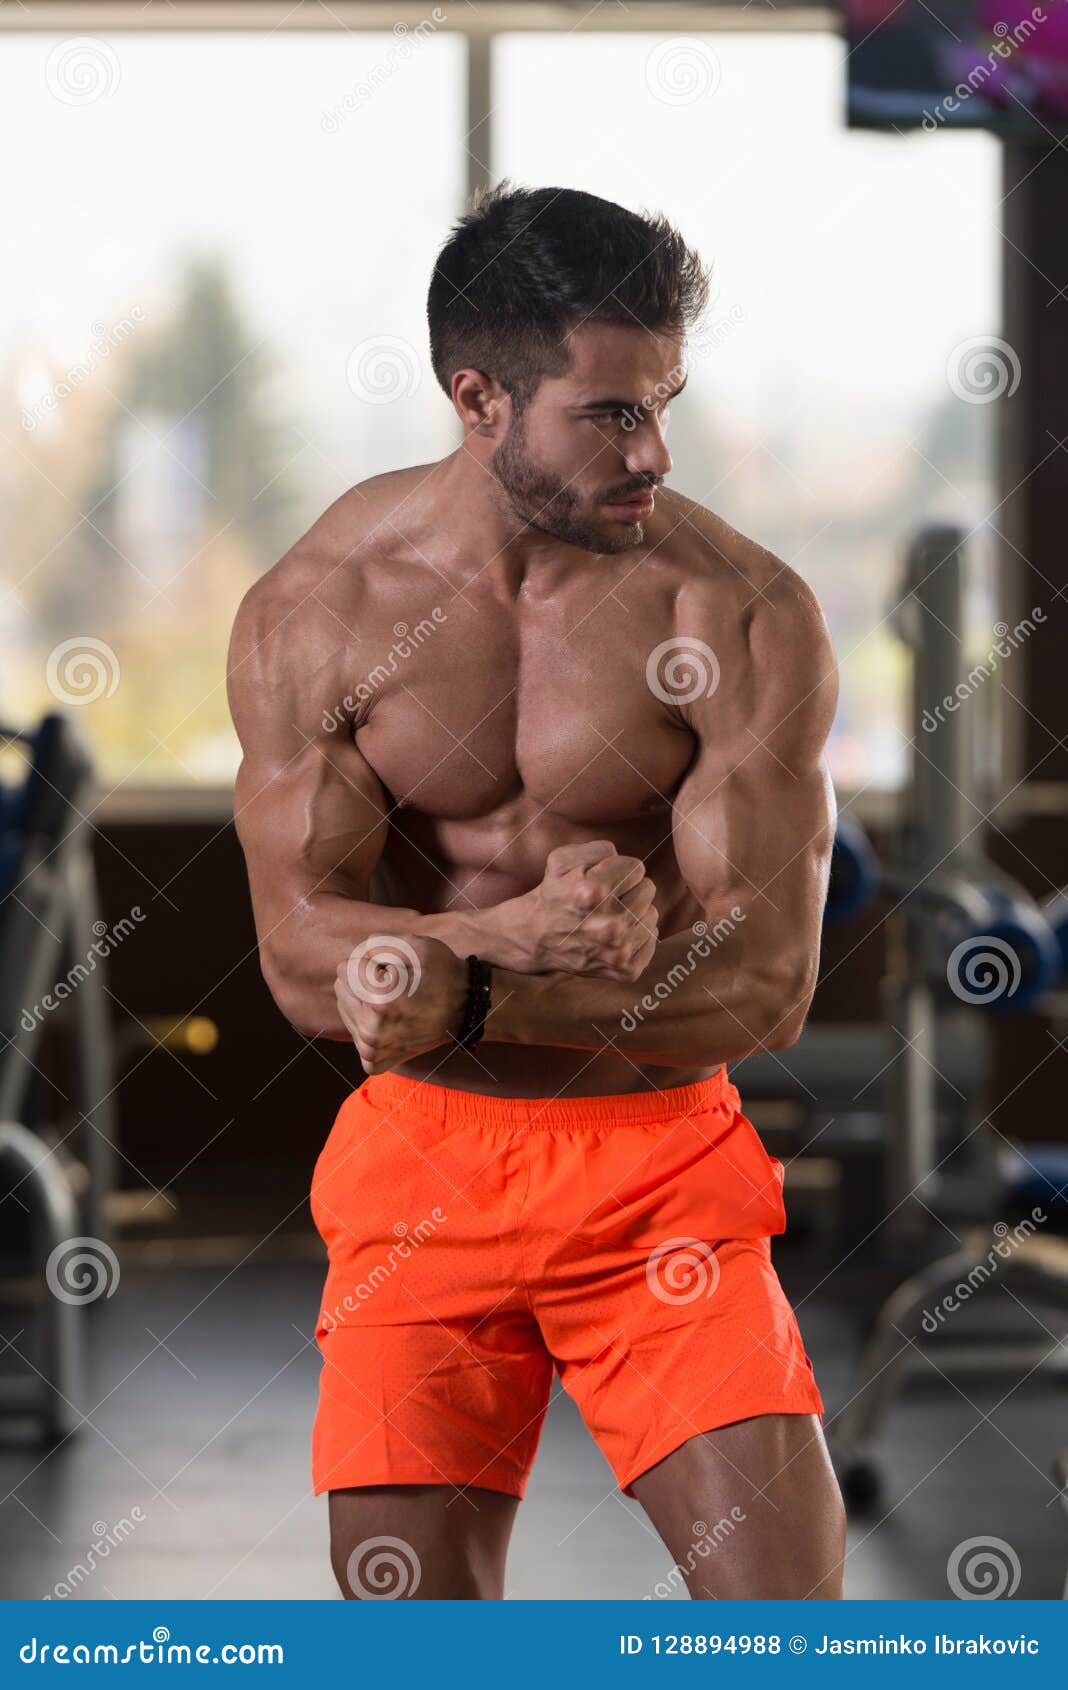 Athletic man with a muscular body poses in the gym 